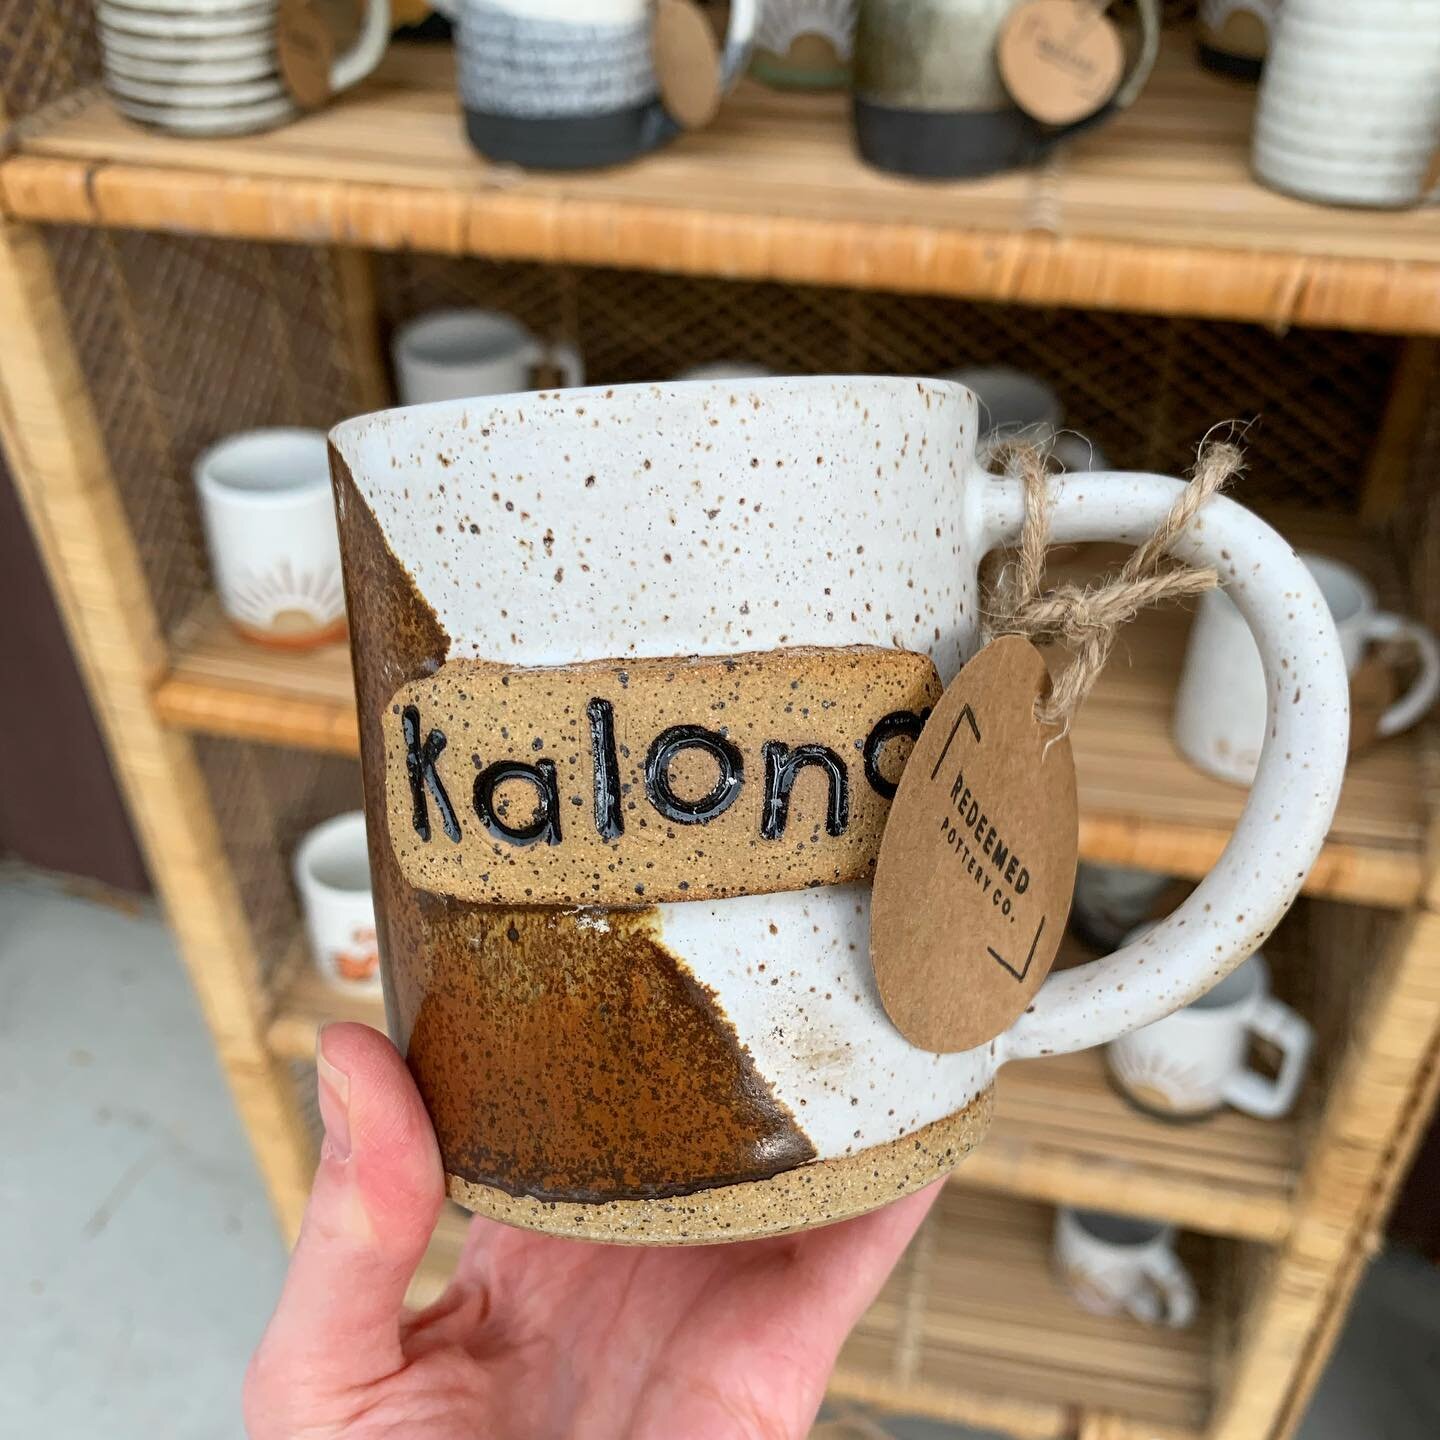 Vendors are already set up and tucked under tents this morning. When the rain stops, come shop downtown!!

Kalona Farmers Market
Every Saturday, 9am - 12pm